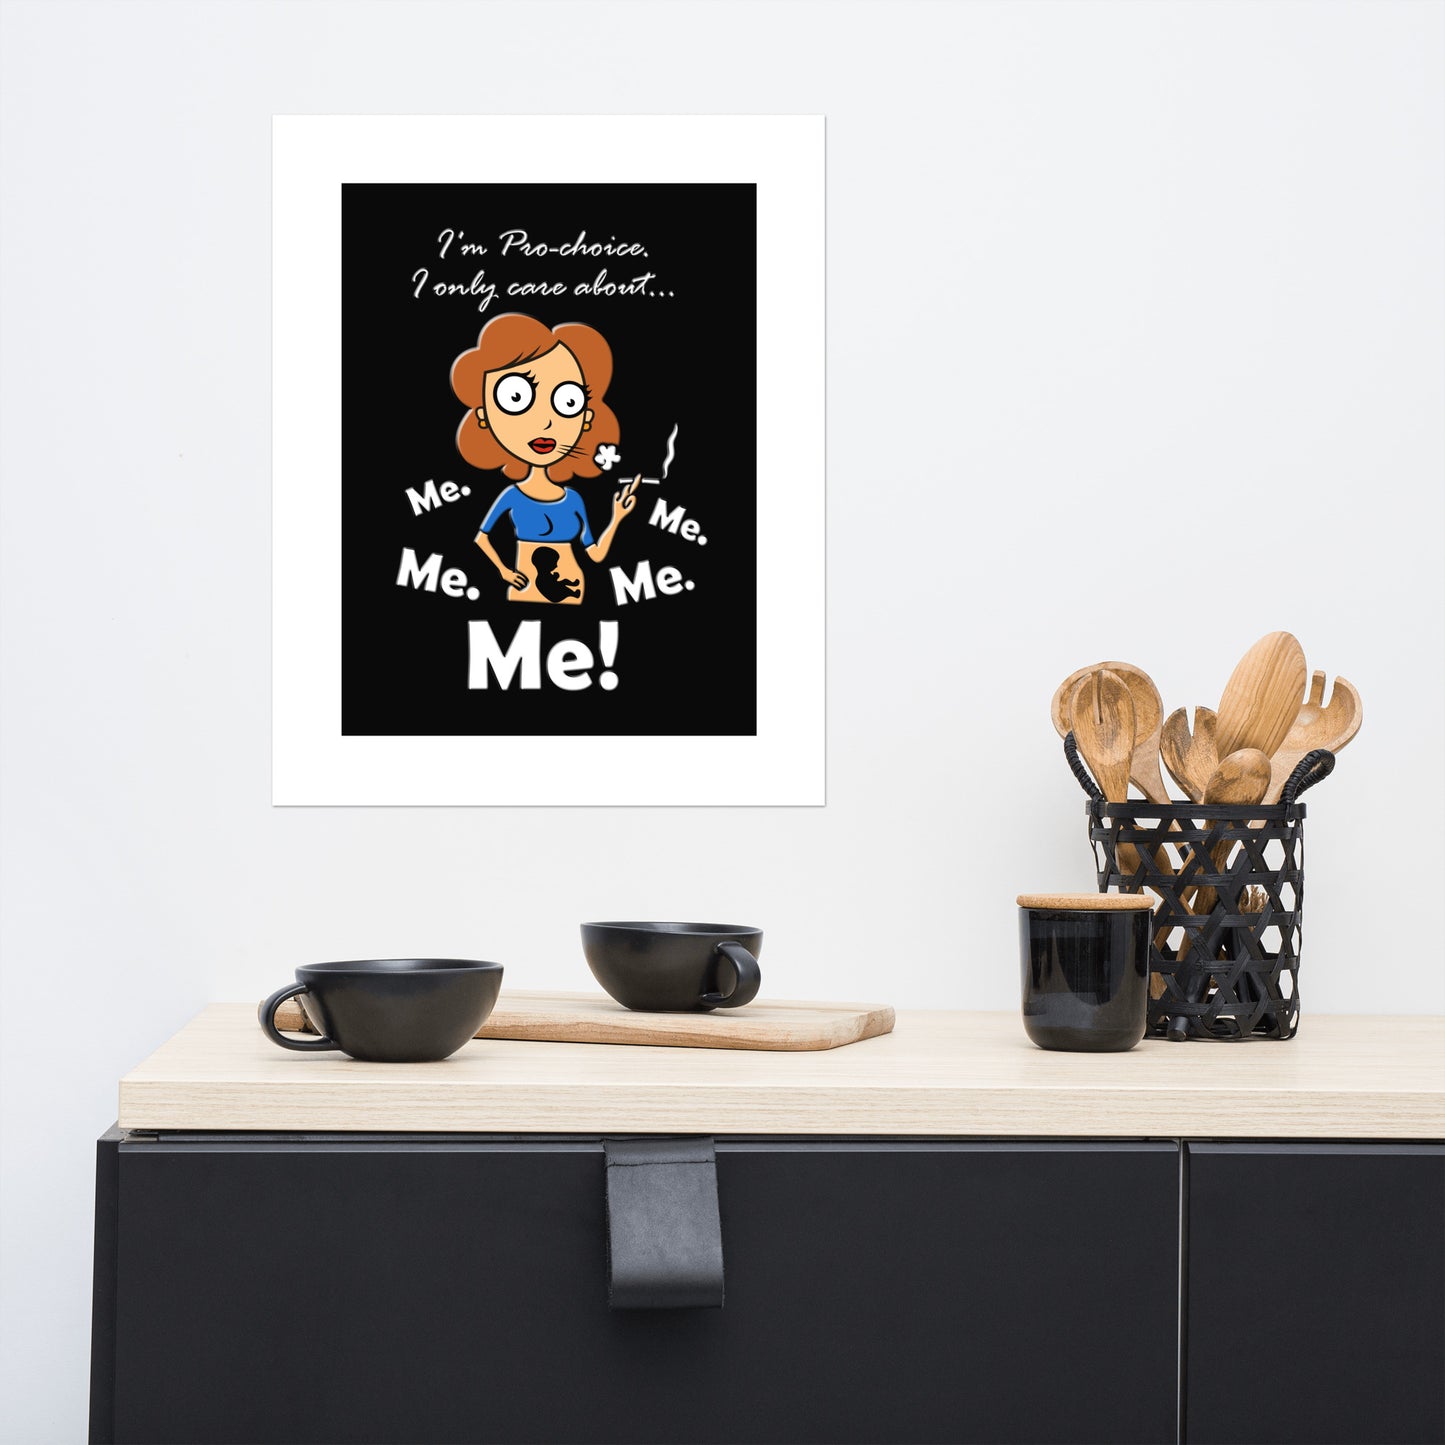 A015 Art Print - Museum Quality Giclée Print Featuring a Graphic of a Young Pregnant Woman Smoking, with the Text “I’m Pro-choice. I Only Care About Me. Me. Me. Me. Me!”